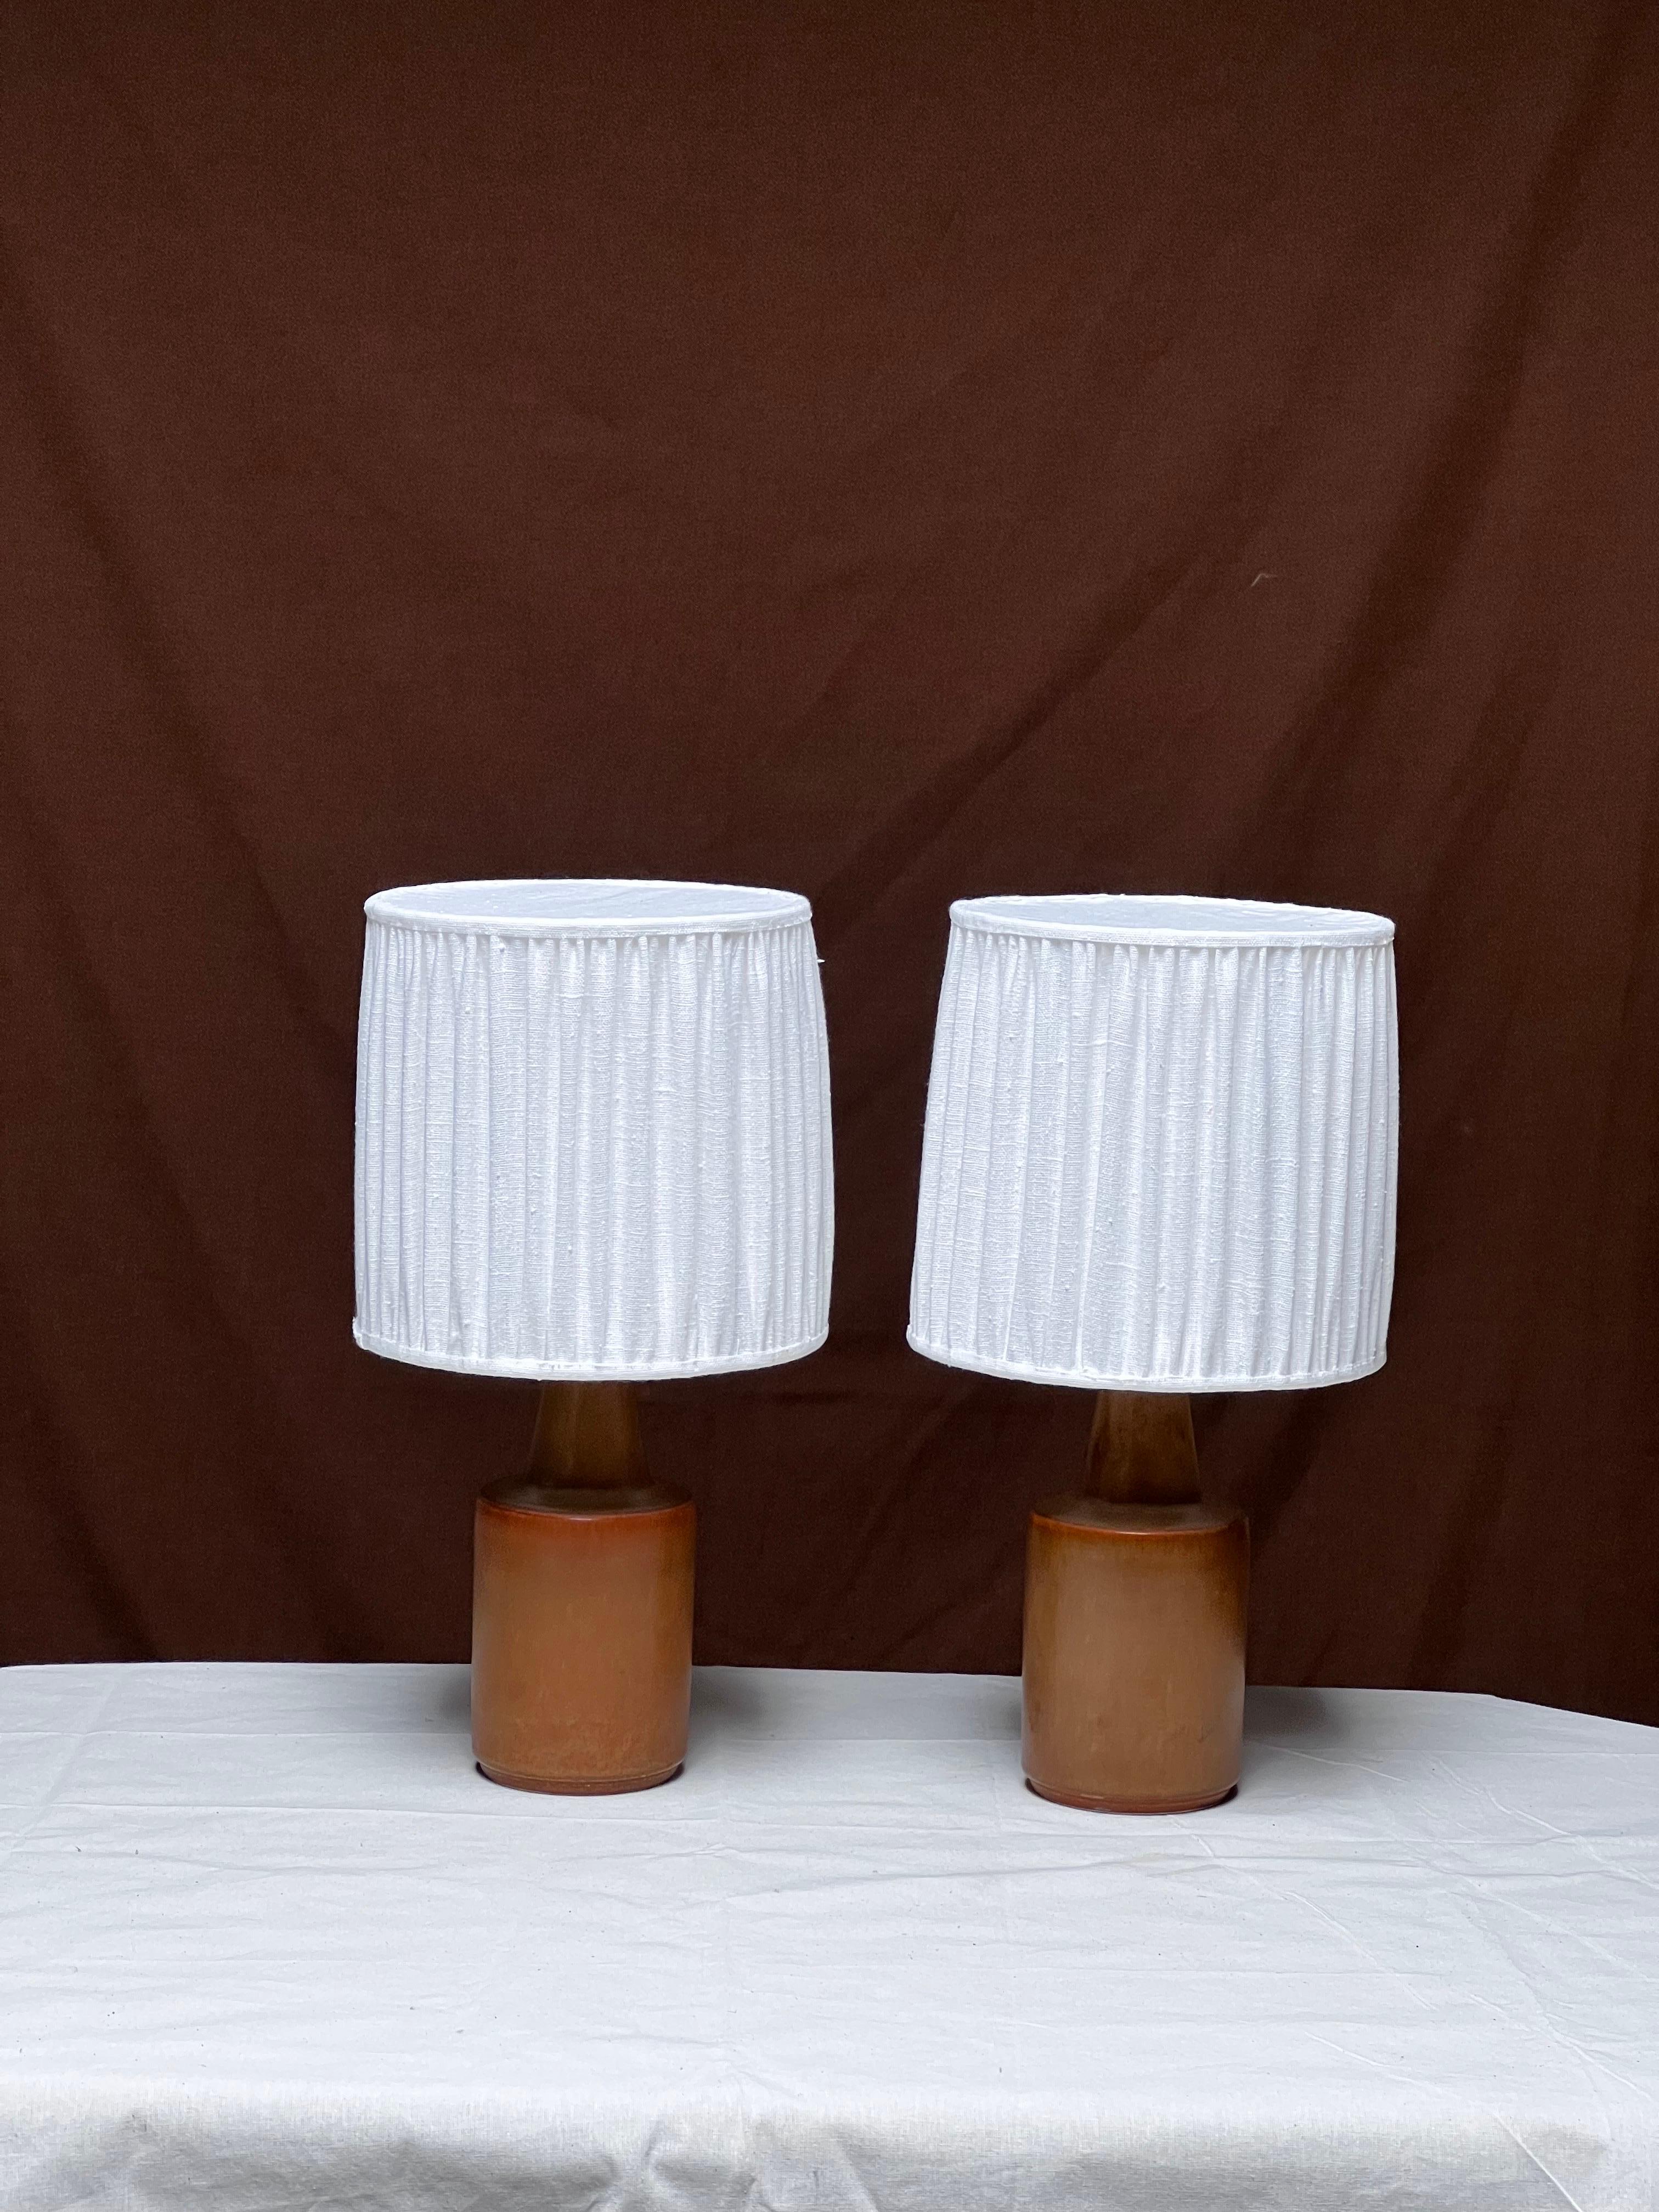 Pair of Søholm ceramics table lamps made of clay with various shades of brown / orange. This is a very elegant pair of table lamps. We have replaced the shades by new handmade Belgian linen and all electrical components including eggshell cotton